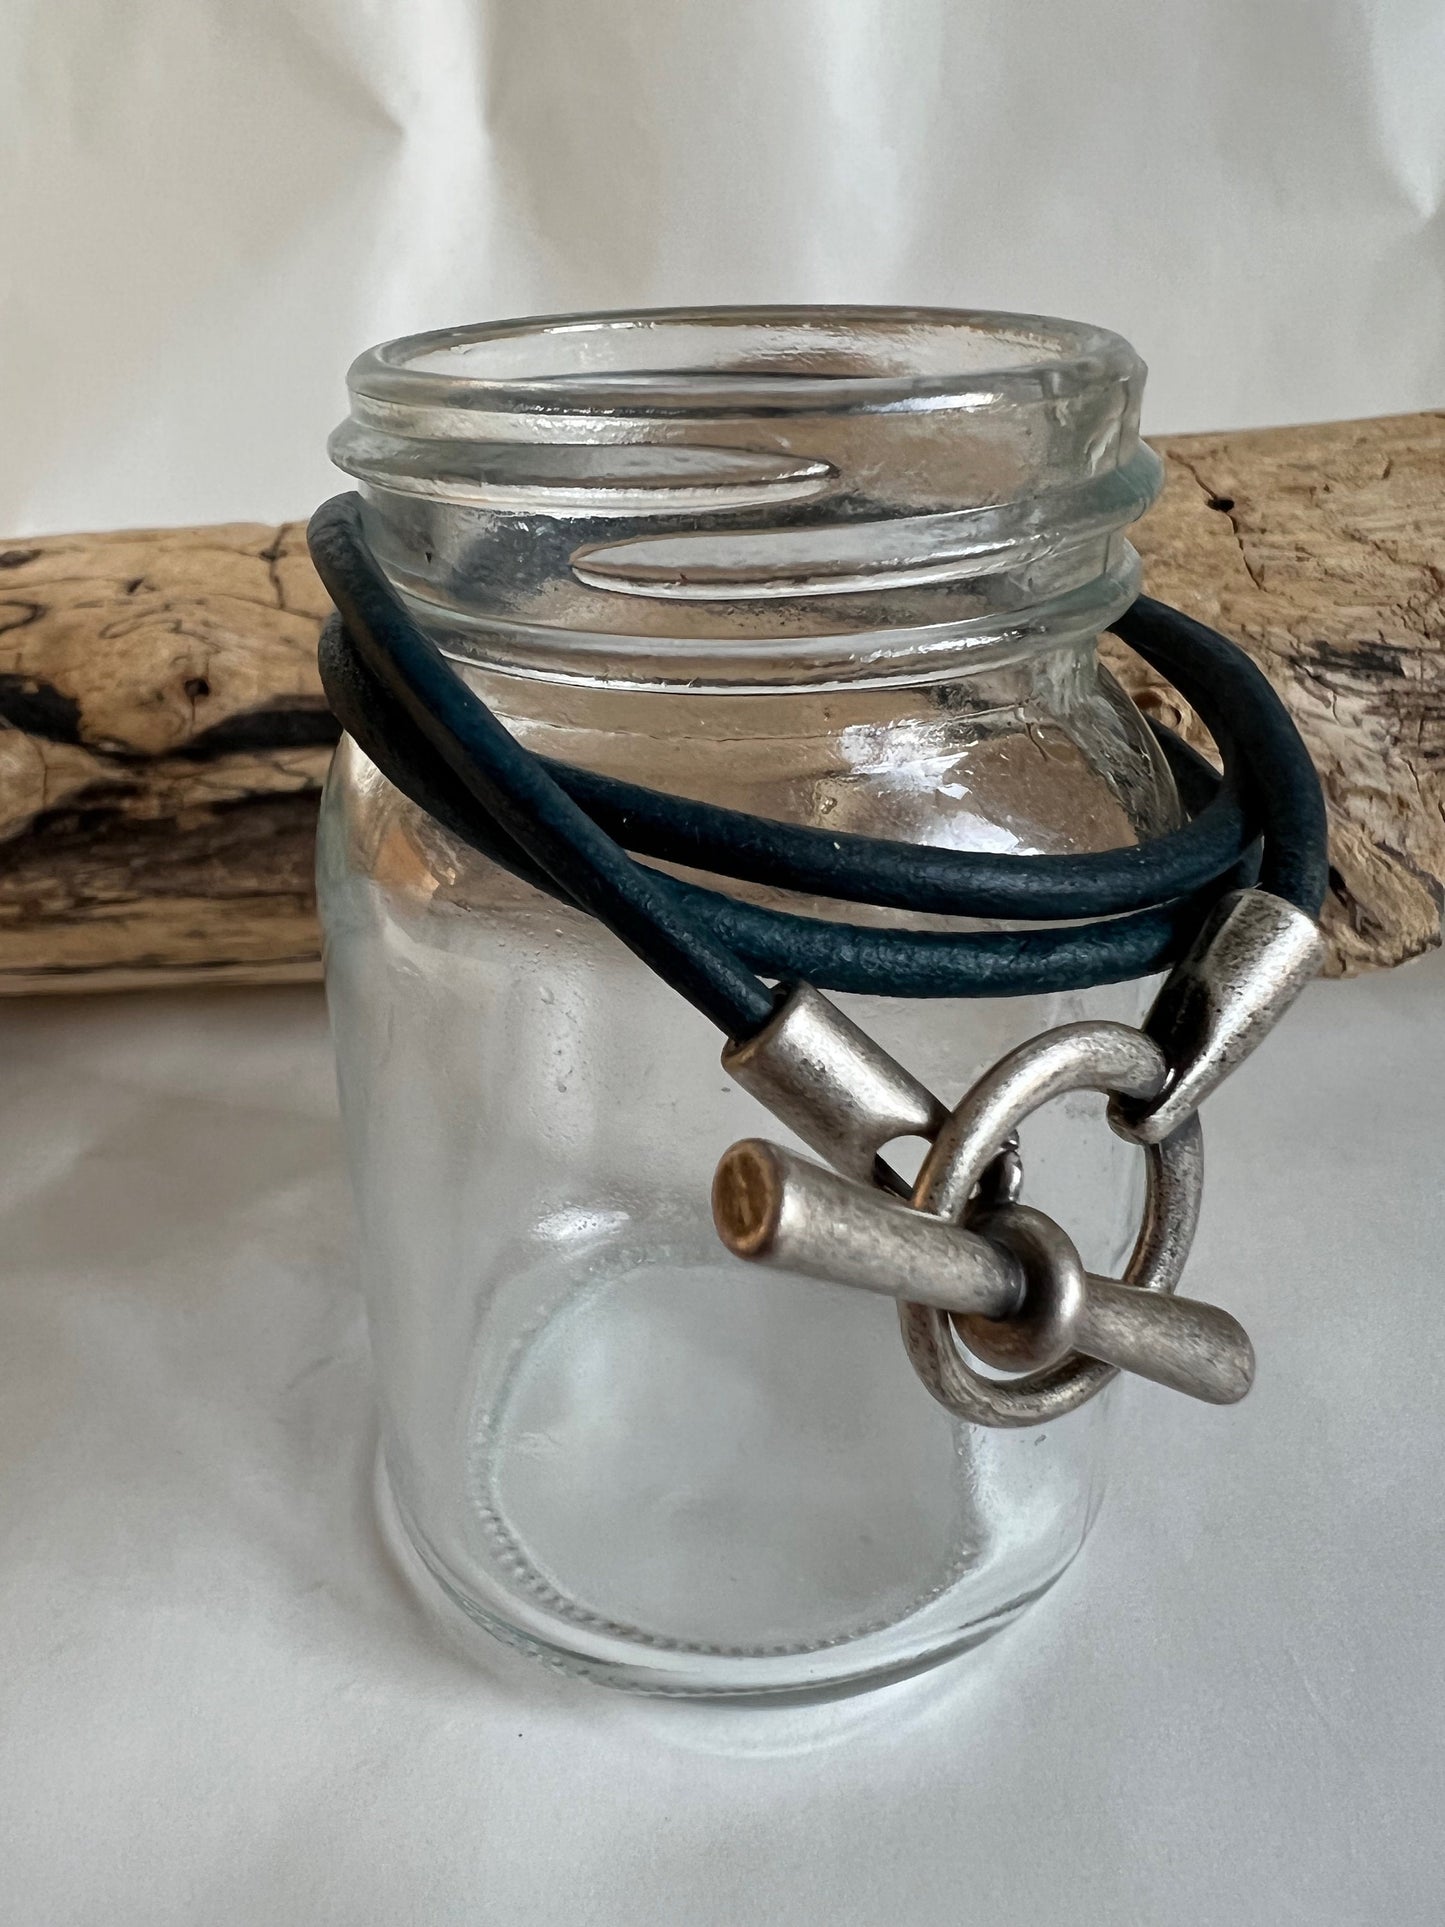 Italian rich dark denim blue  triple wrap leather bracelet with hip silver antiqued toggle clasp. Soft leather and trendy clasp.